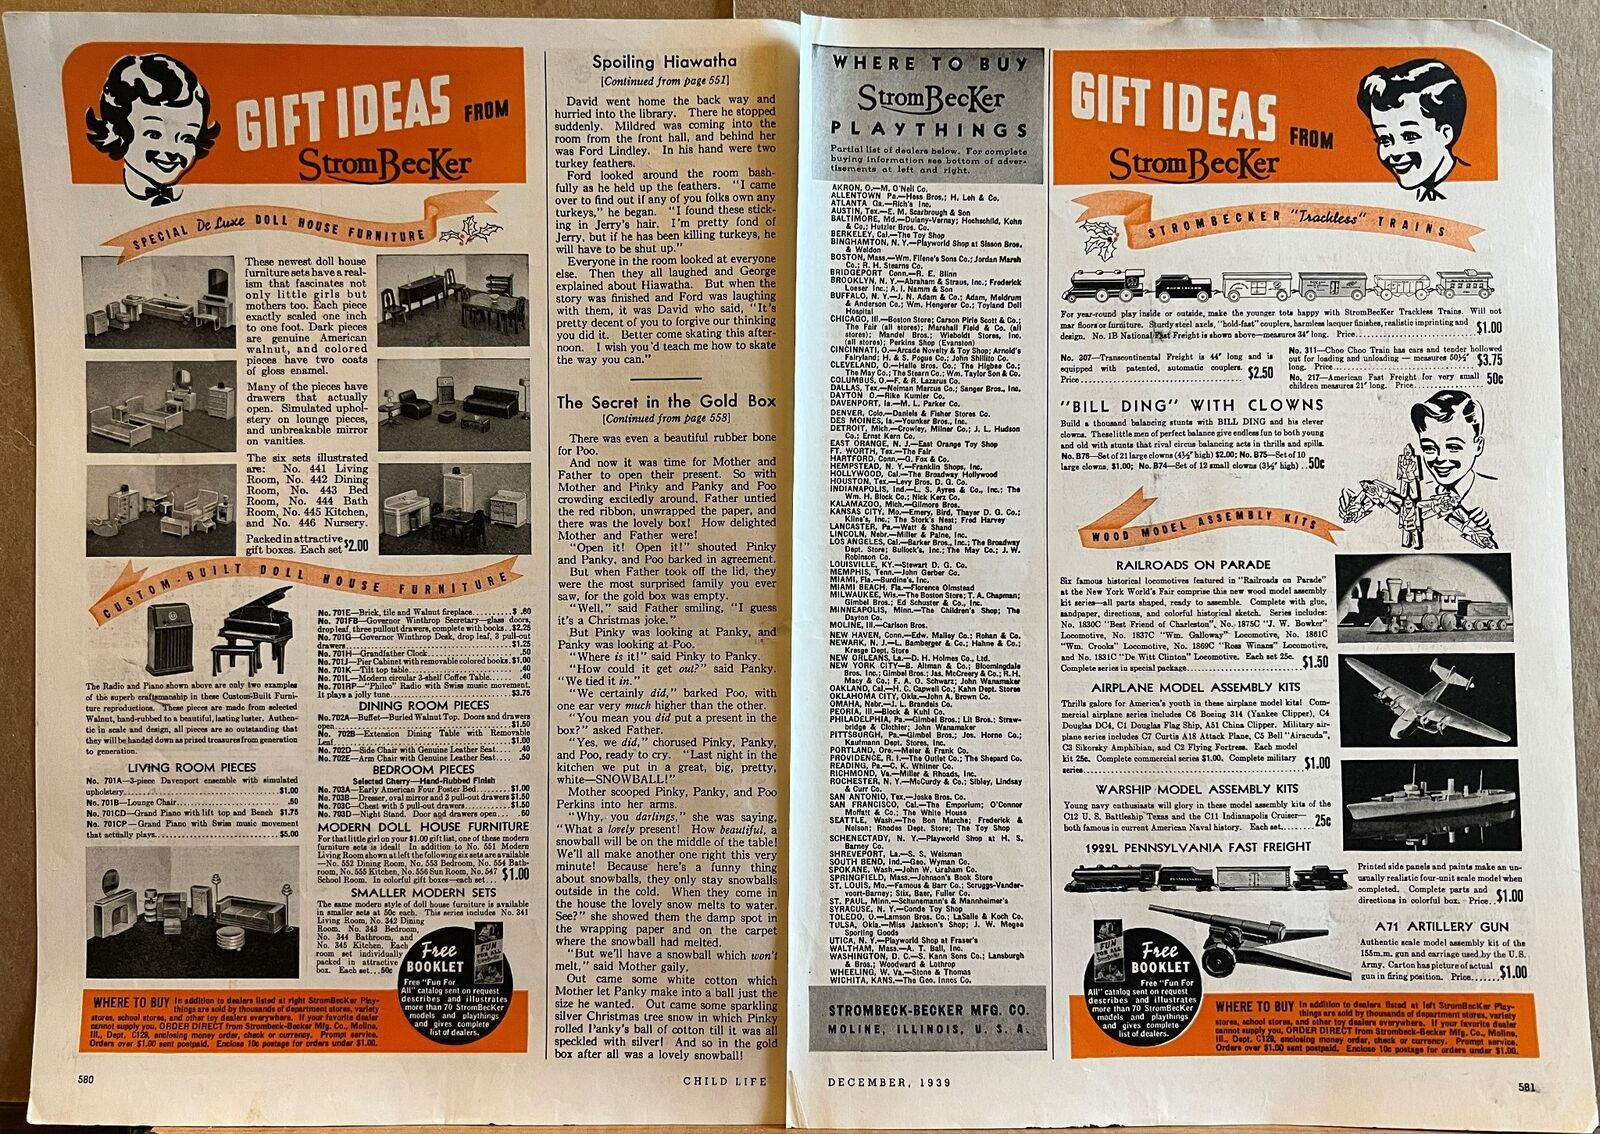 Strombeck-becker Mfg Co Moline Il 1939 Print Ad Toy Ideas For Boys And Girls